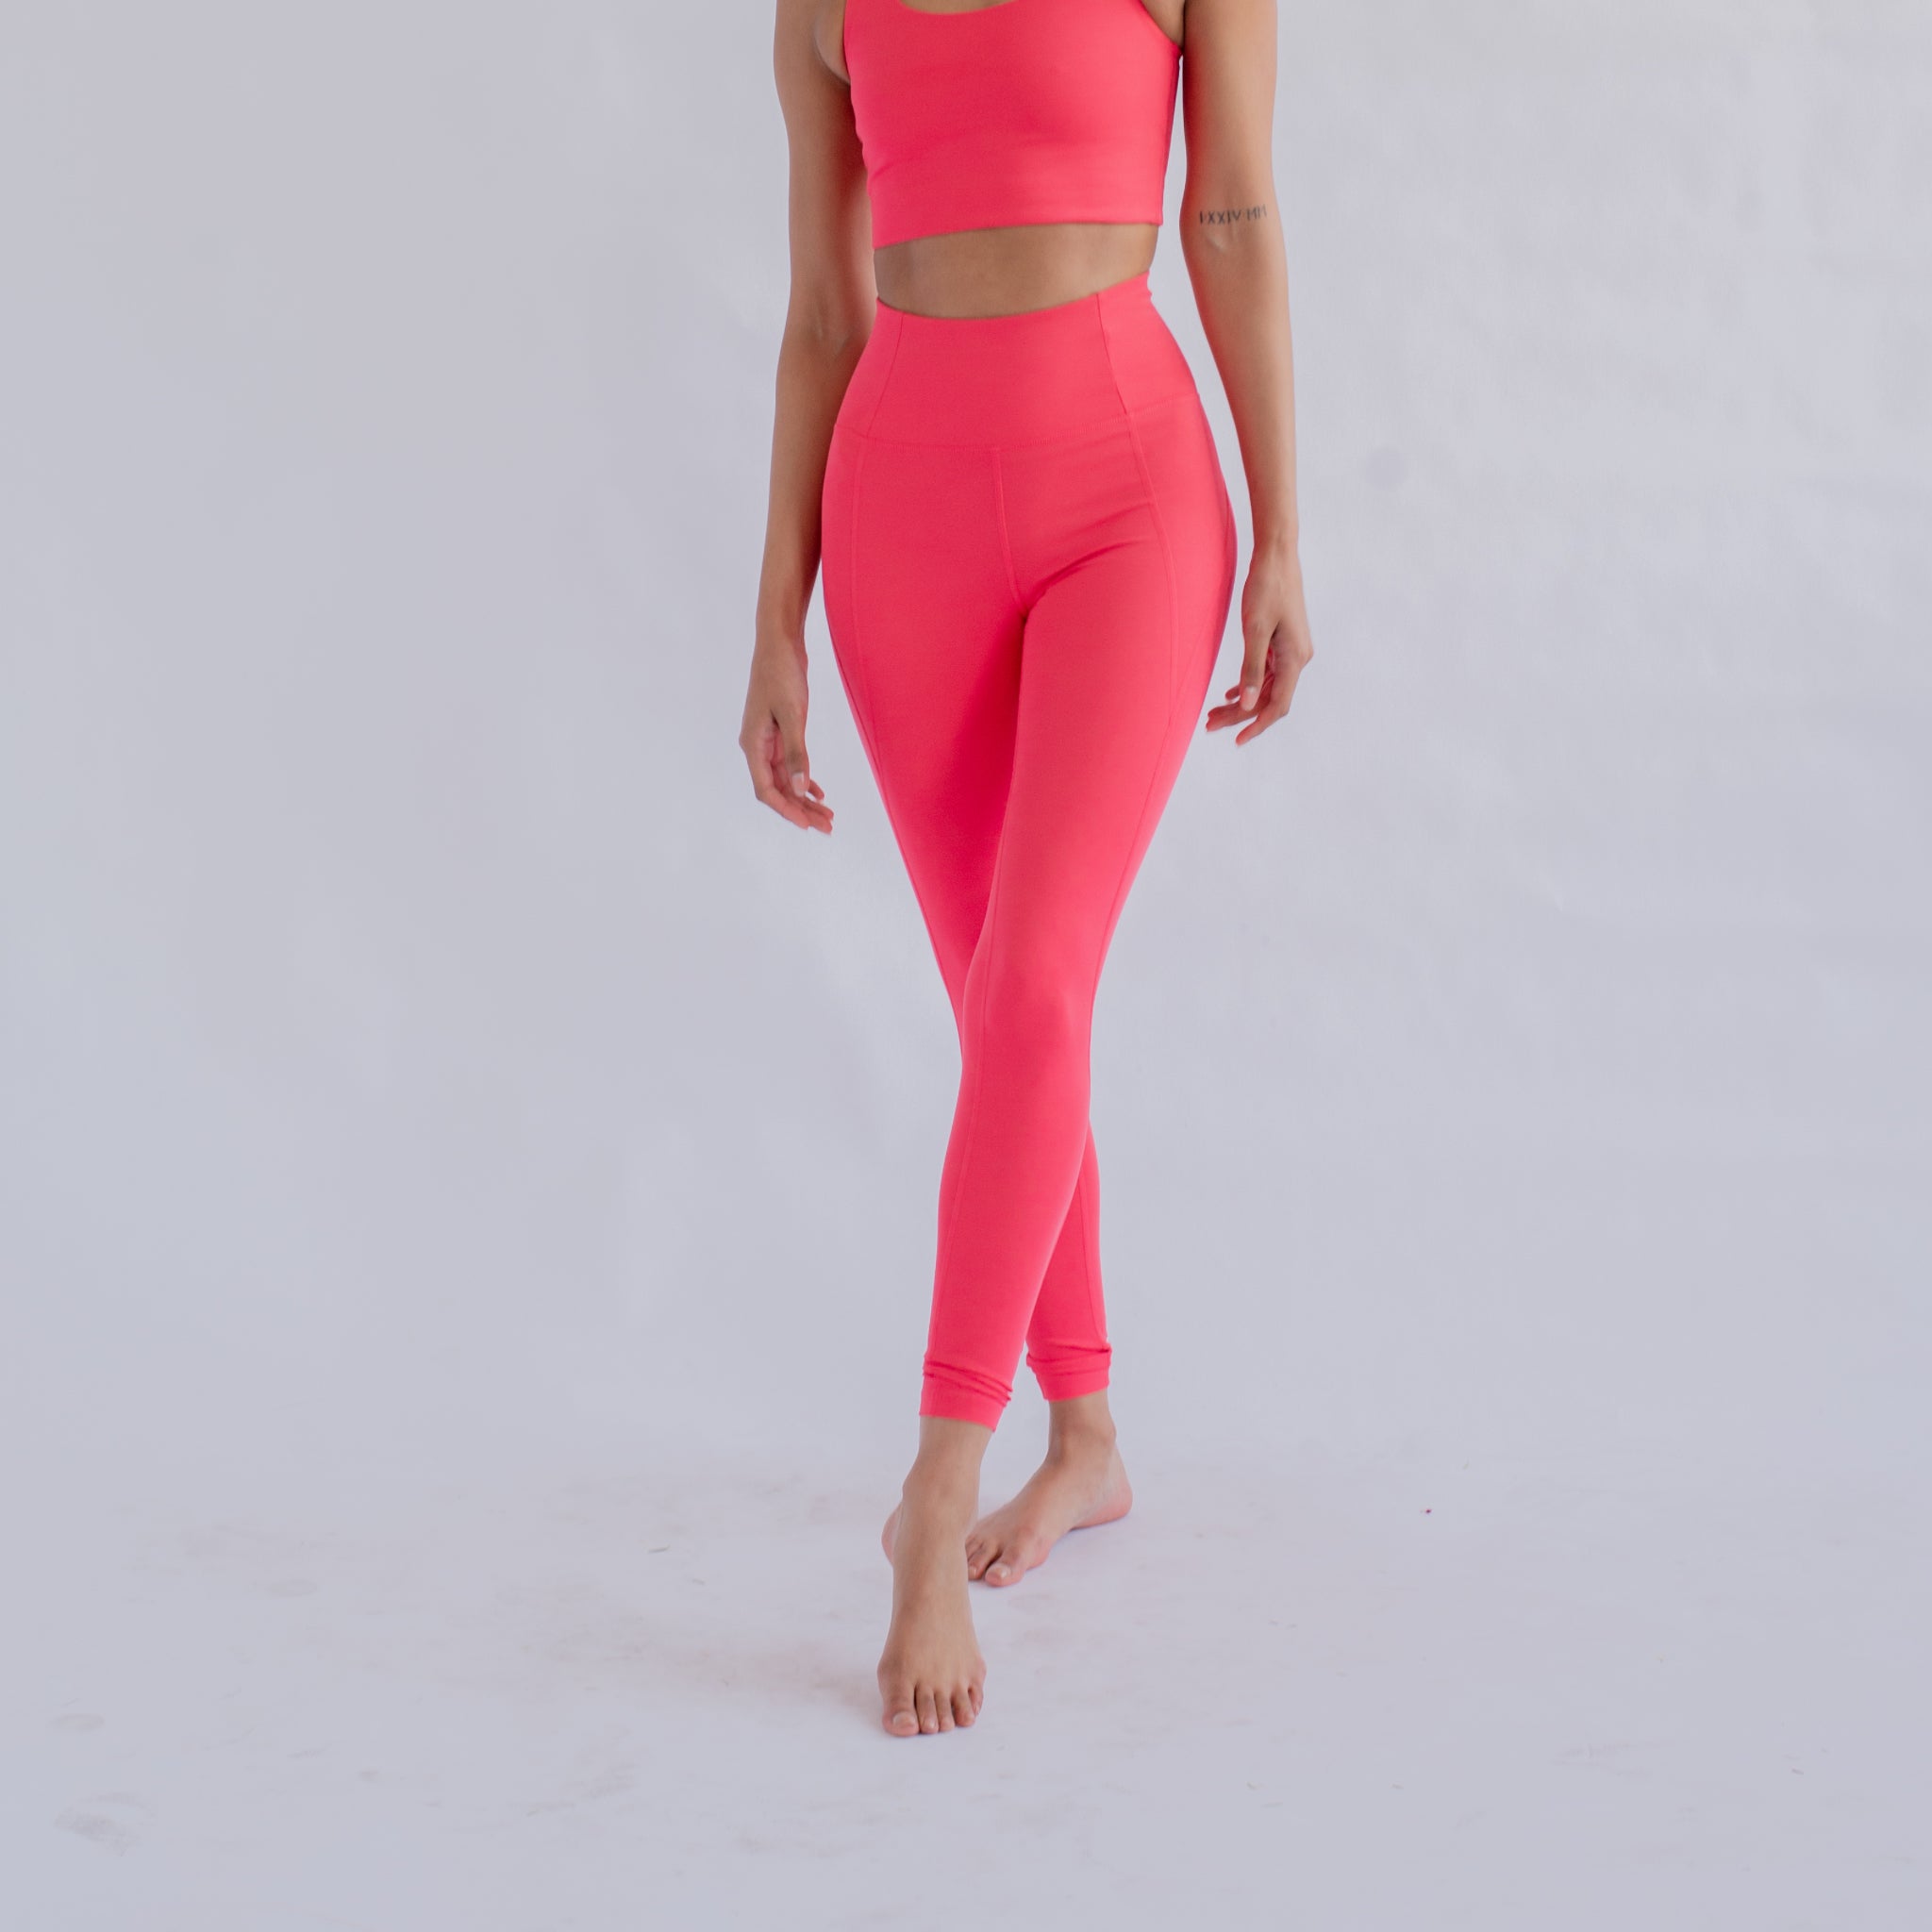 girlfriend collective, Pants & Jumpsuits, Girlfriend Collective Clay  Compression Leggings M 23 34 Inseam